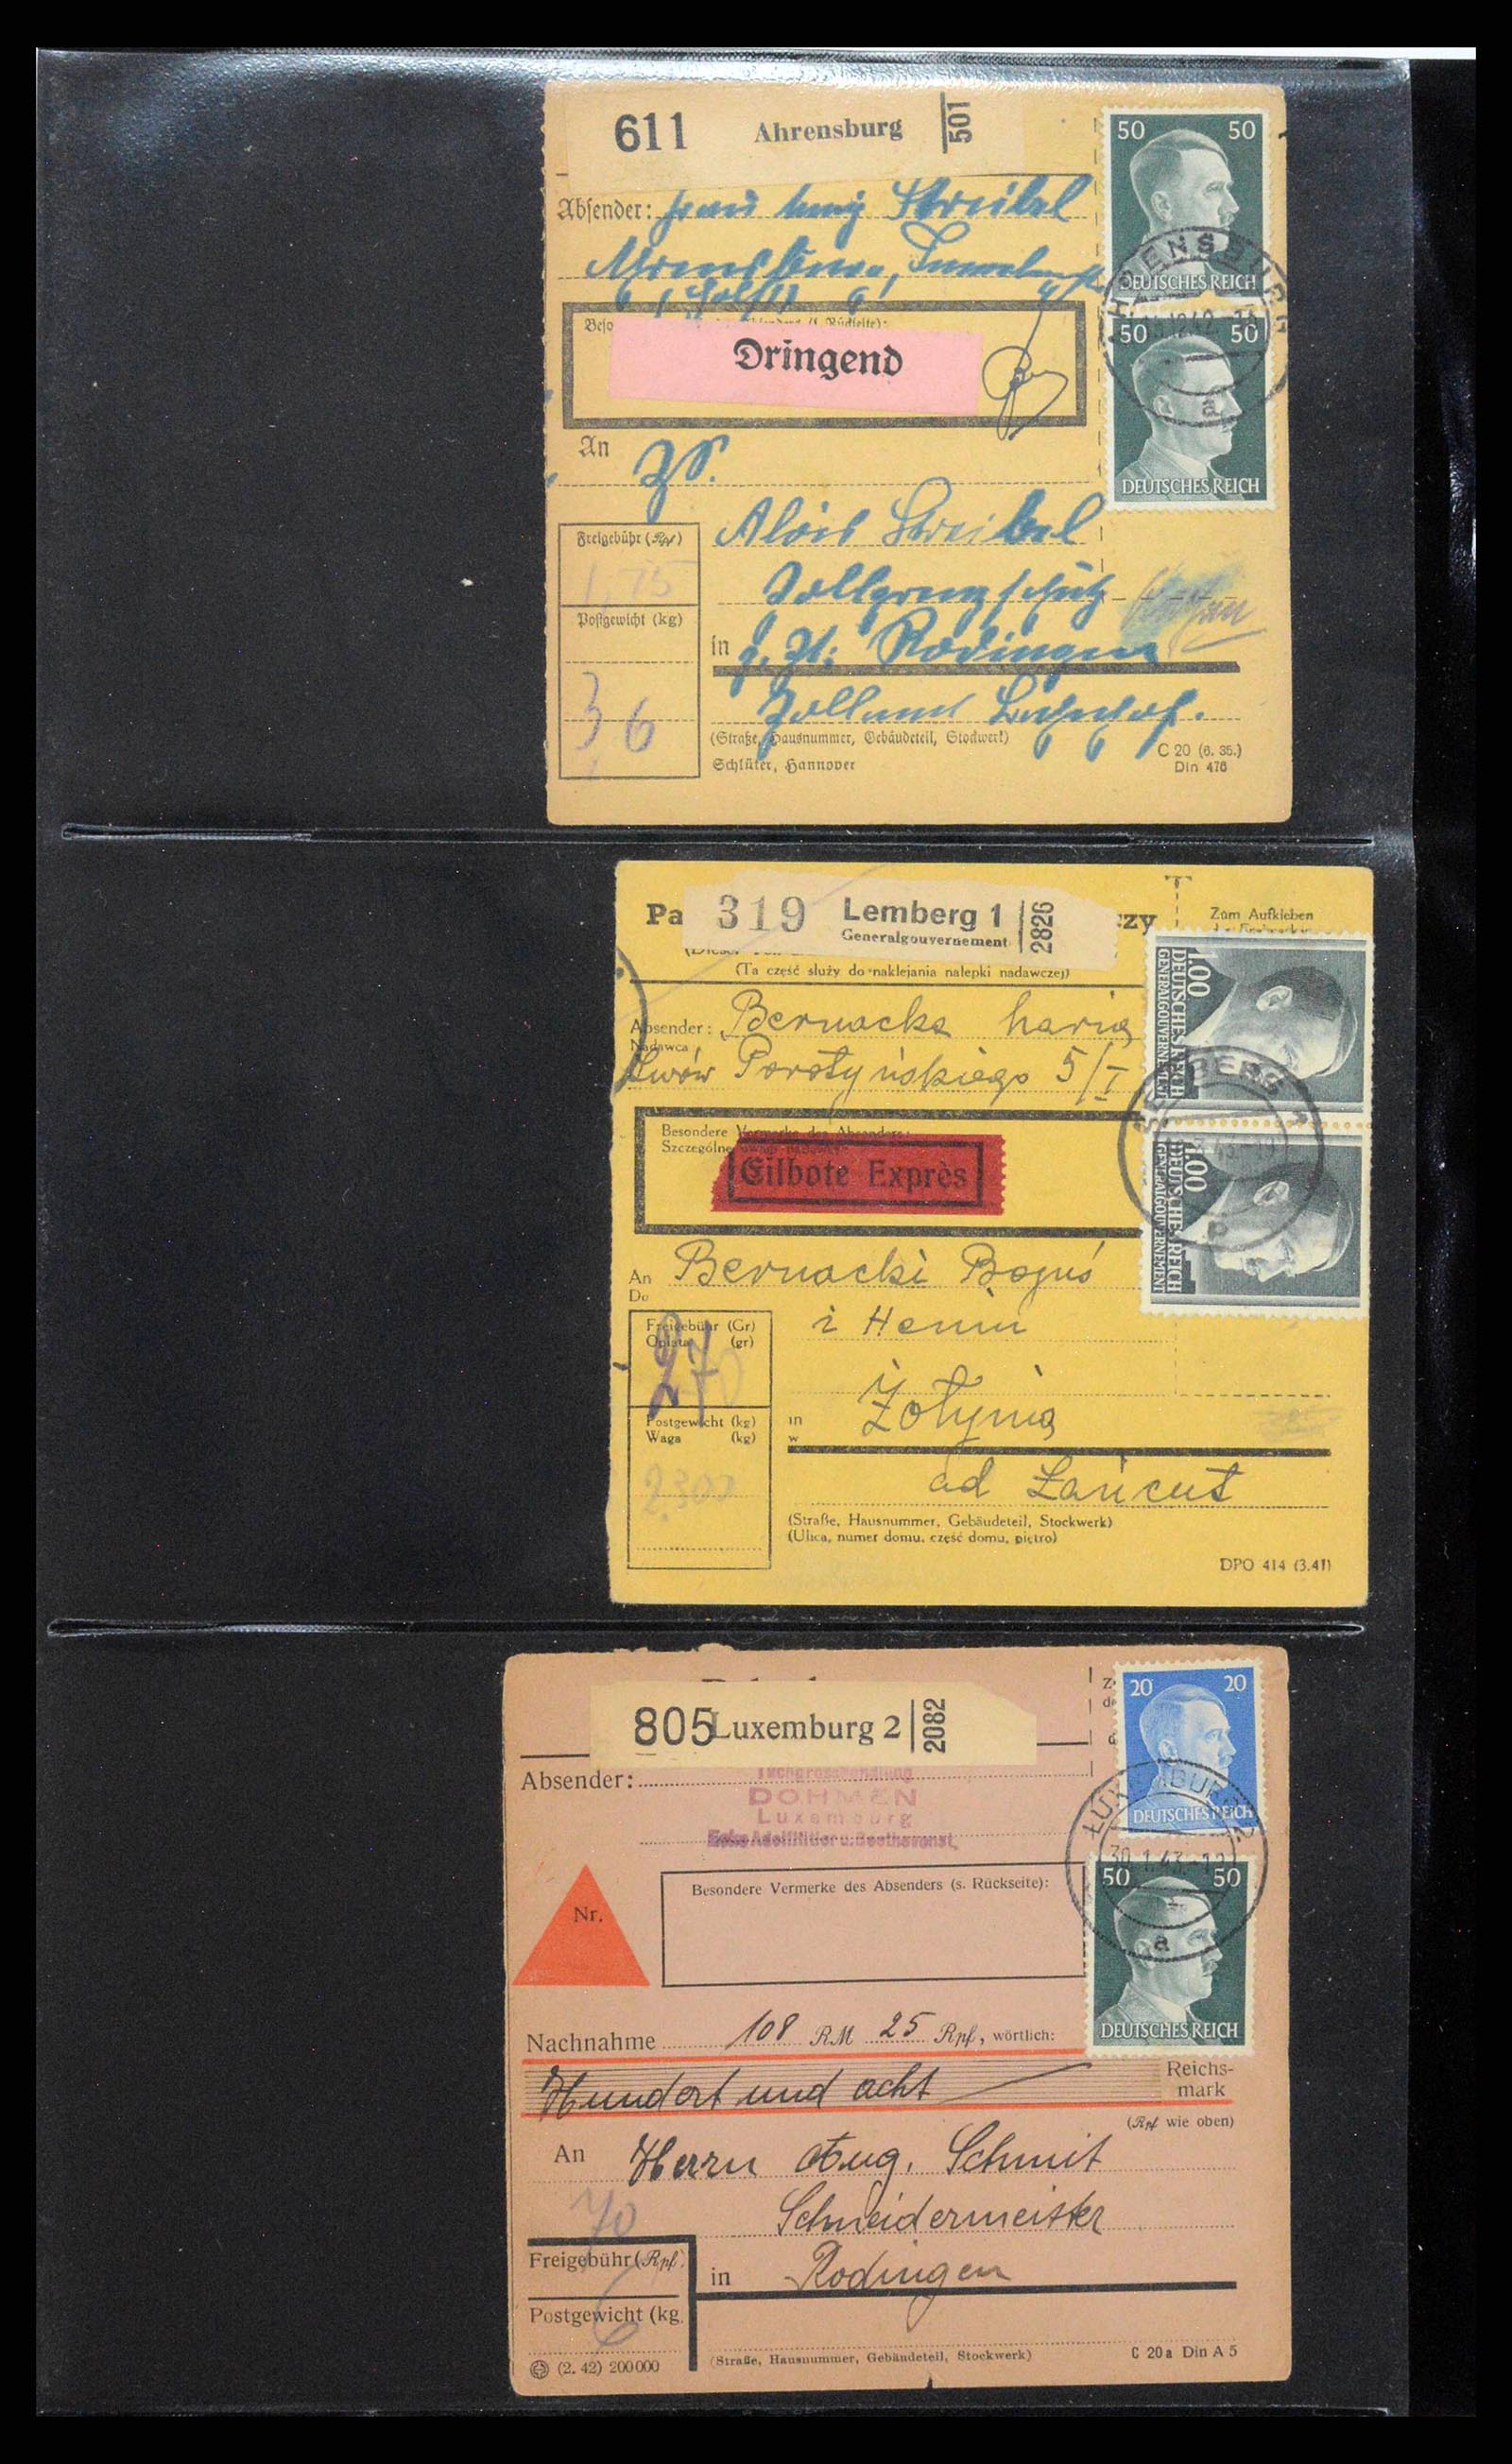 38646 0116 - Stamp collection 38646 Germany covers and cards 1940-1945.